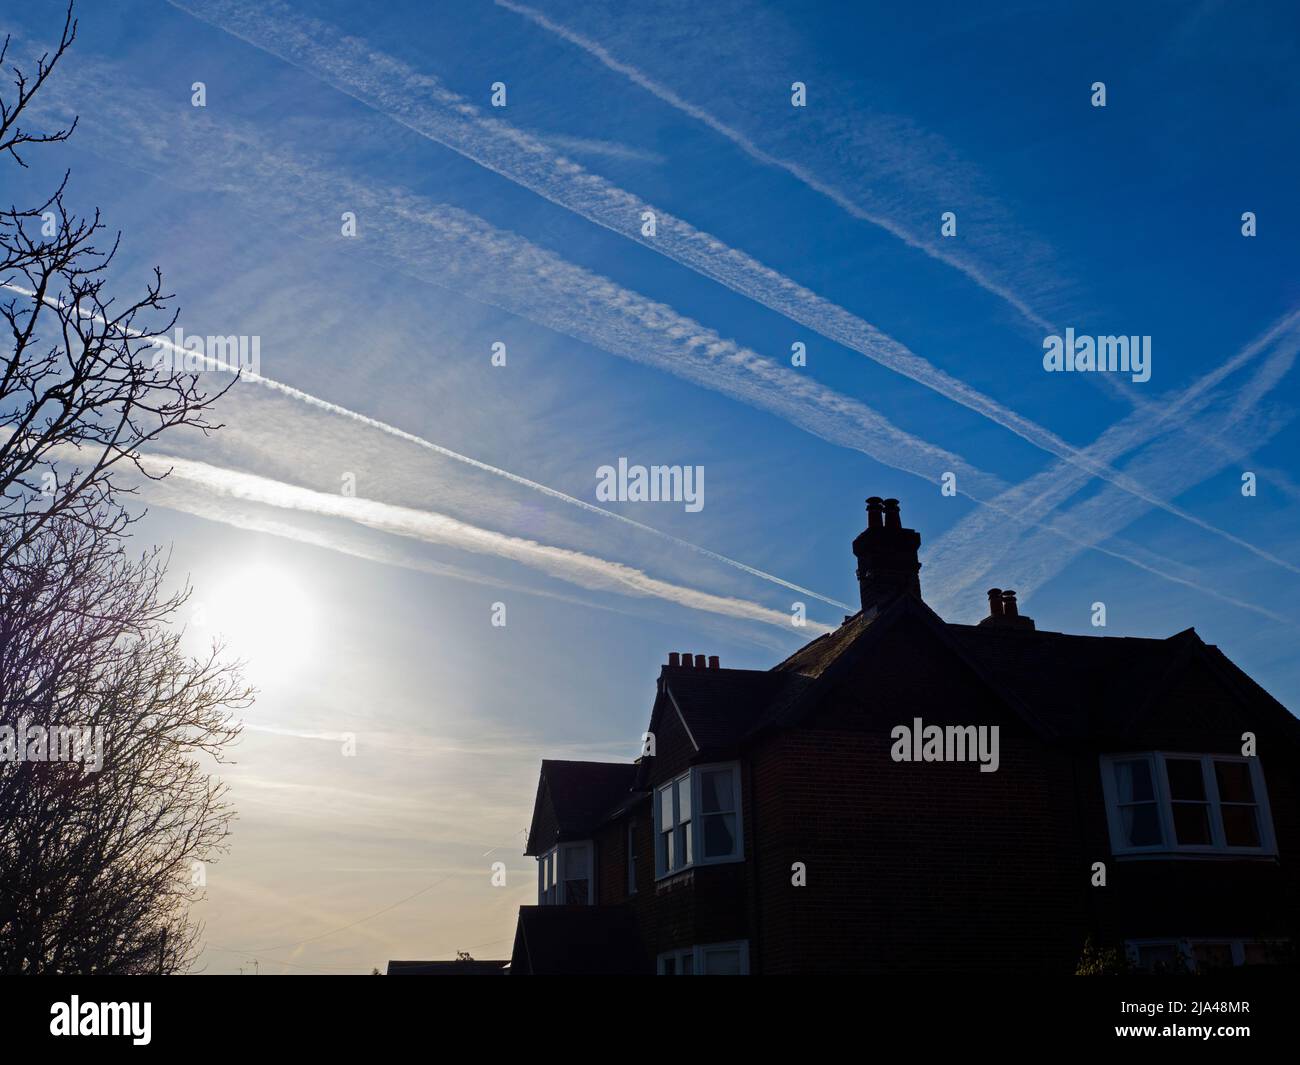 Luminescent dawn sky packed with contrails, seen above Sandford Village, just south of Oxford. Stock Photo